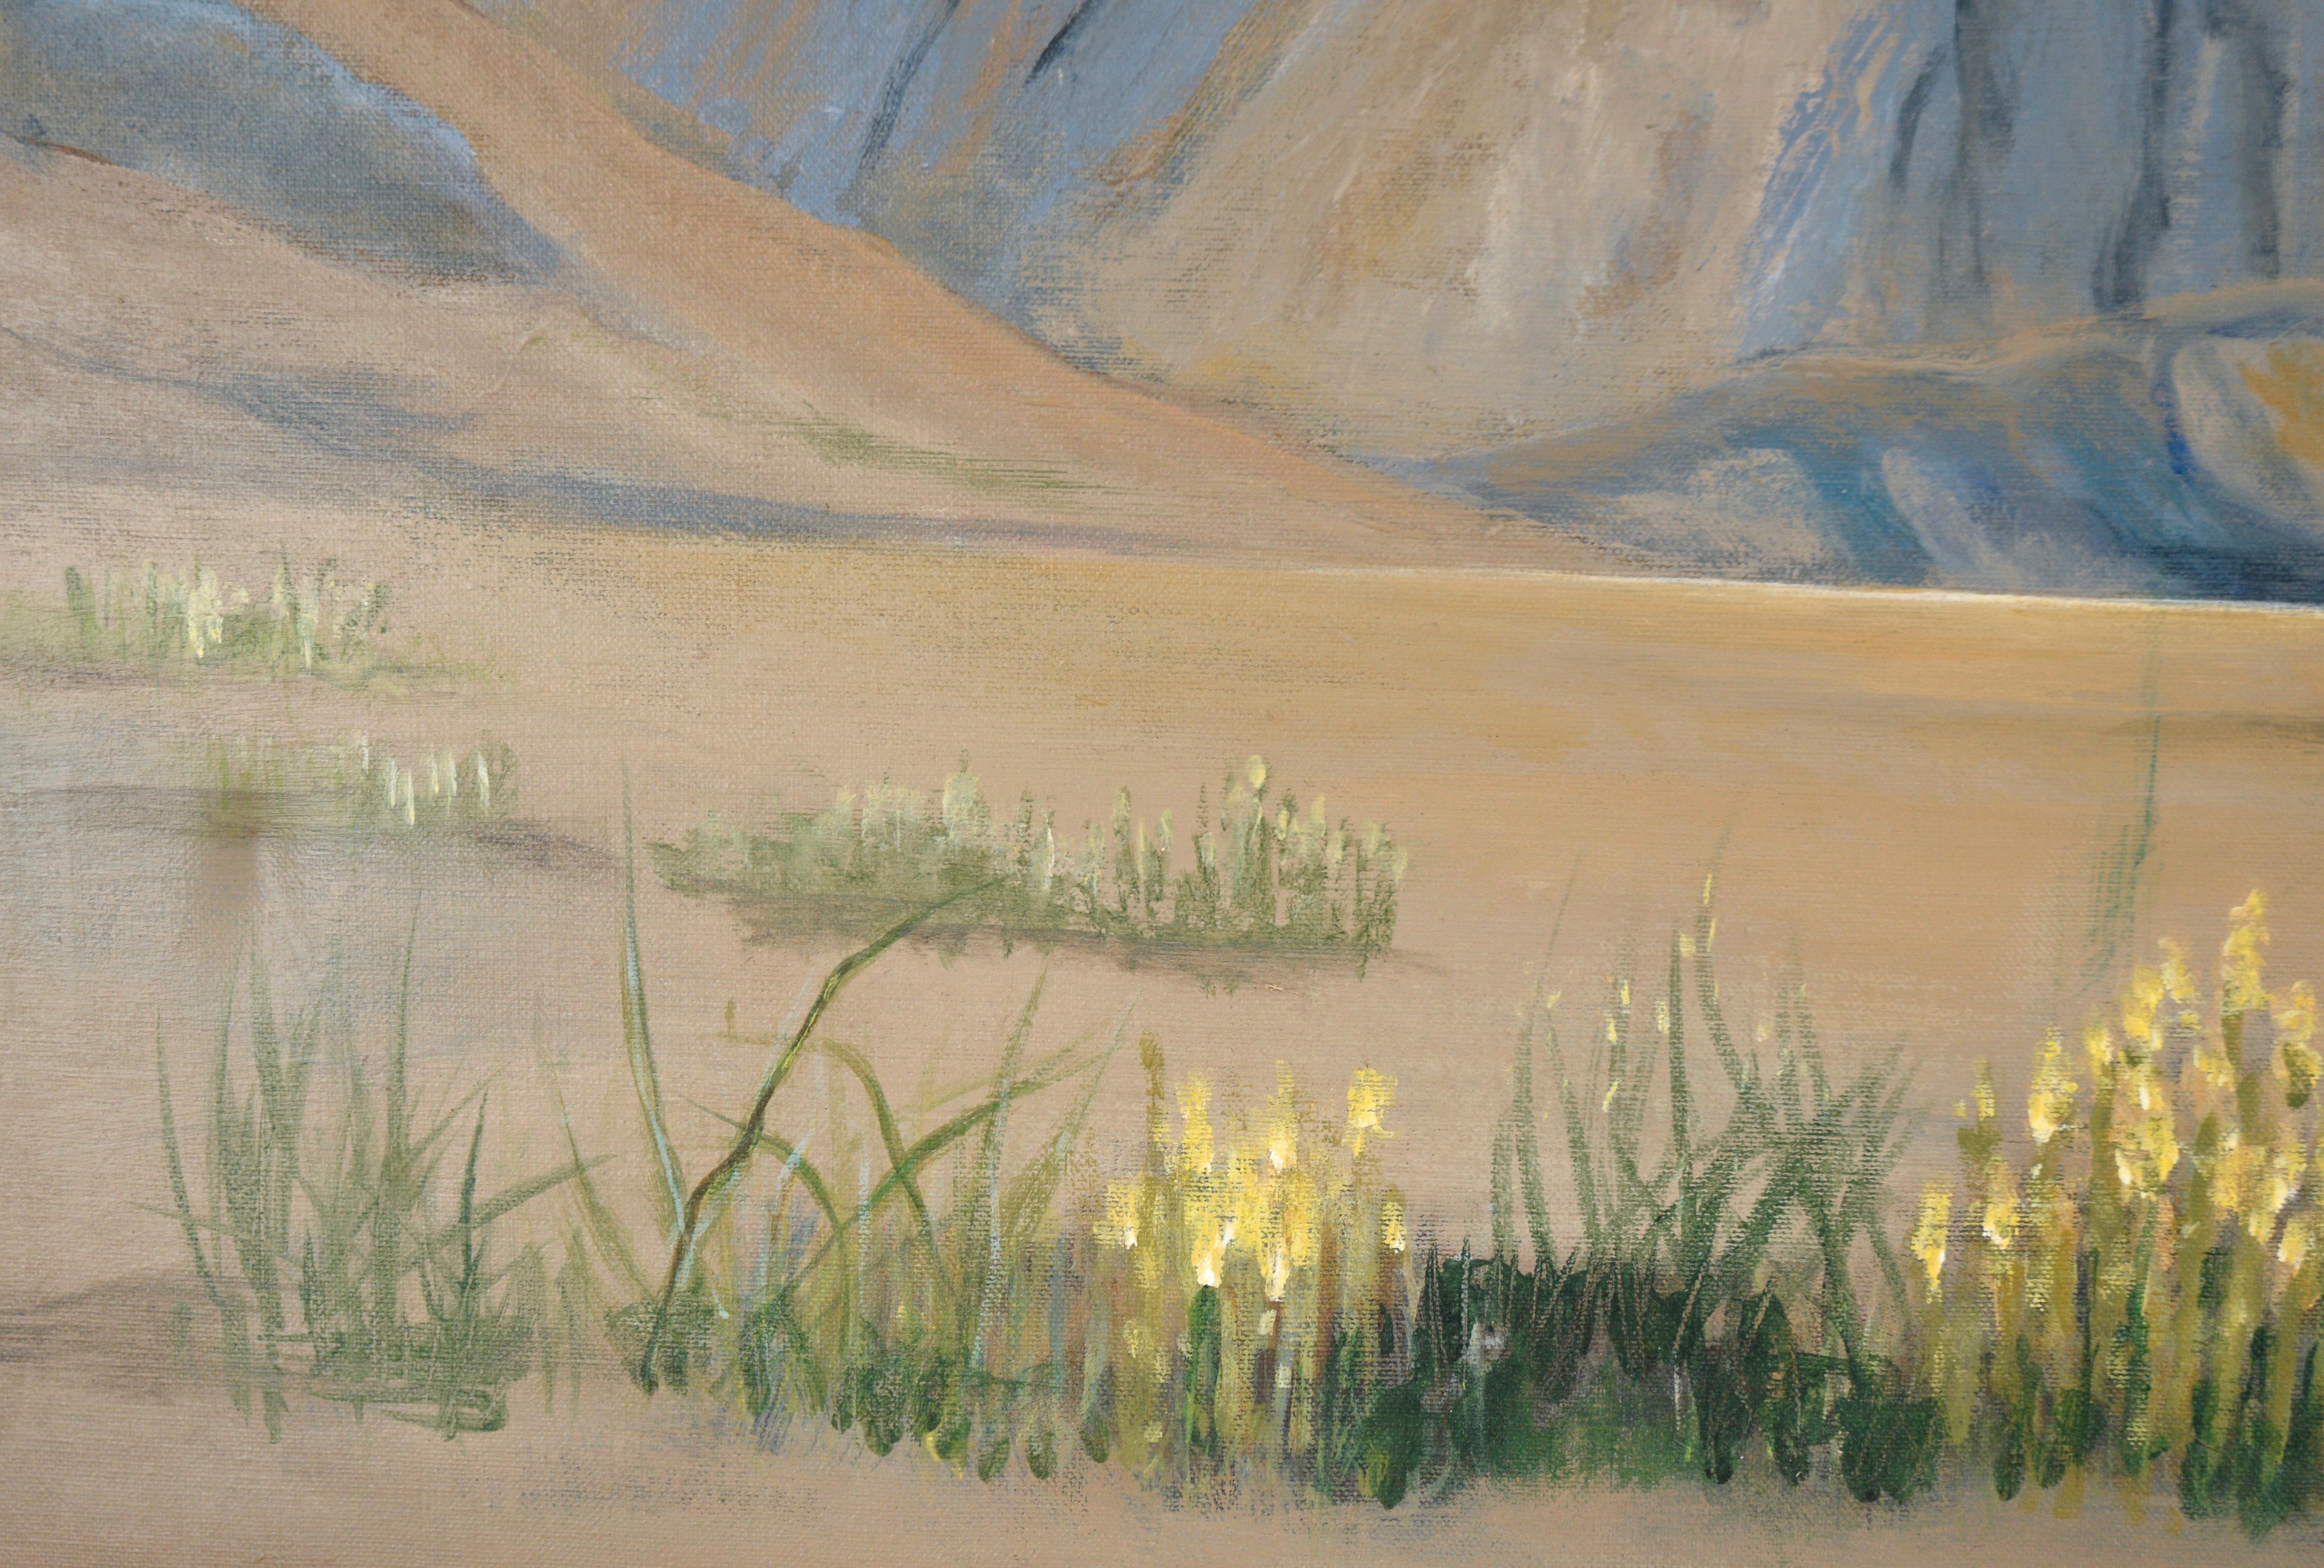 Desert Foothills Under a Blue Sky - Landscape in Acrylic on Canvas For Sale 2